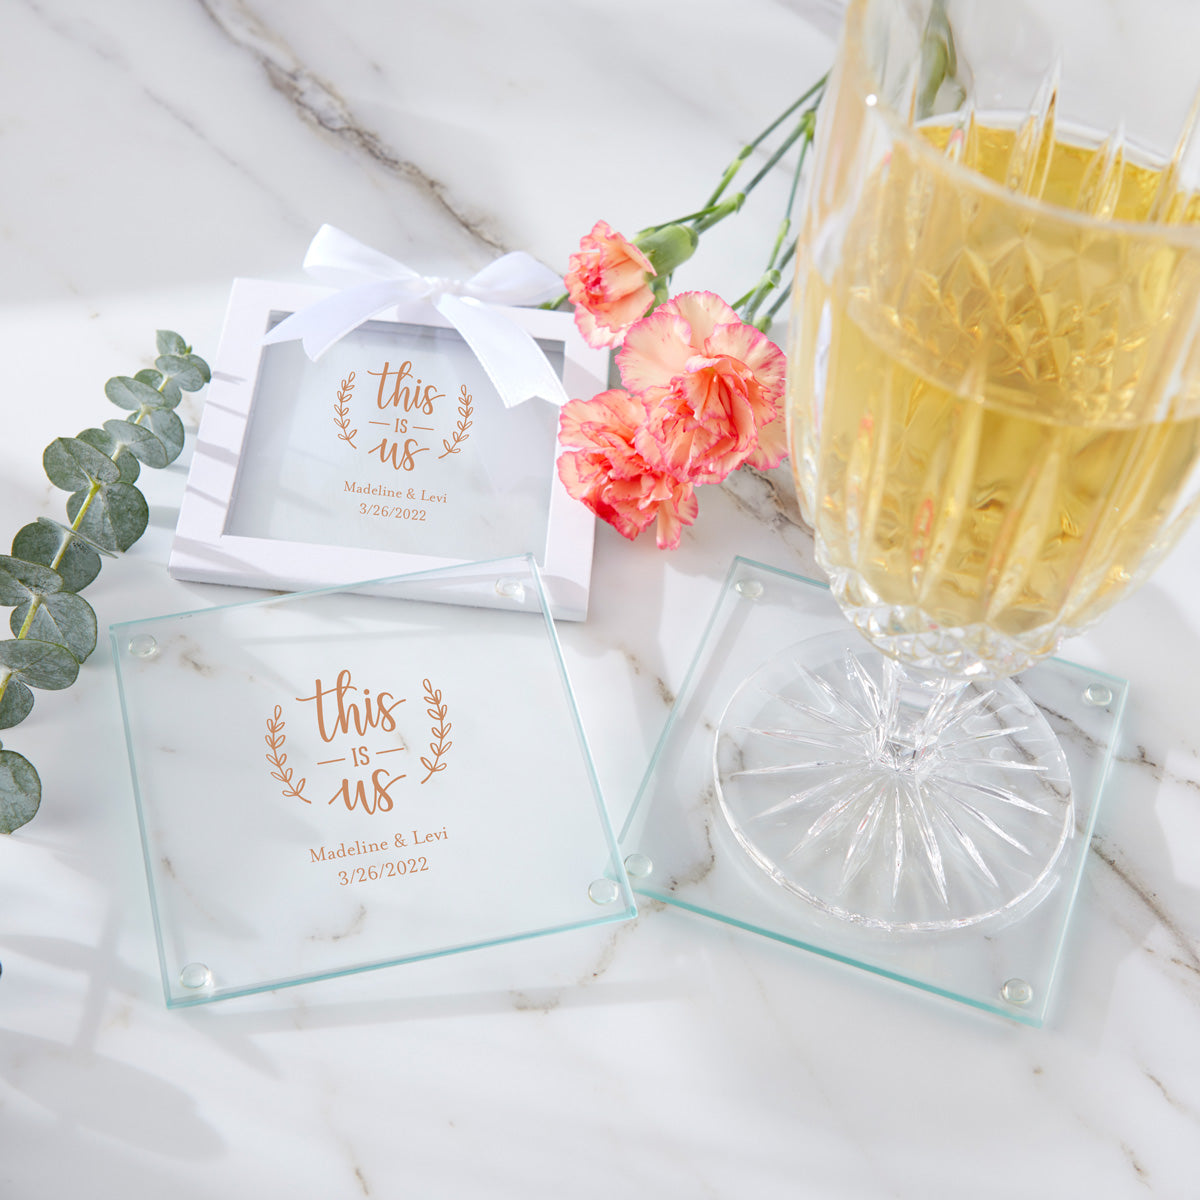 Personalized Glass Coaster (Set of 12) - Main Image7 | My Wedding Favors